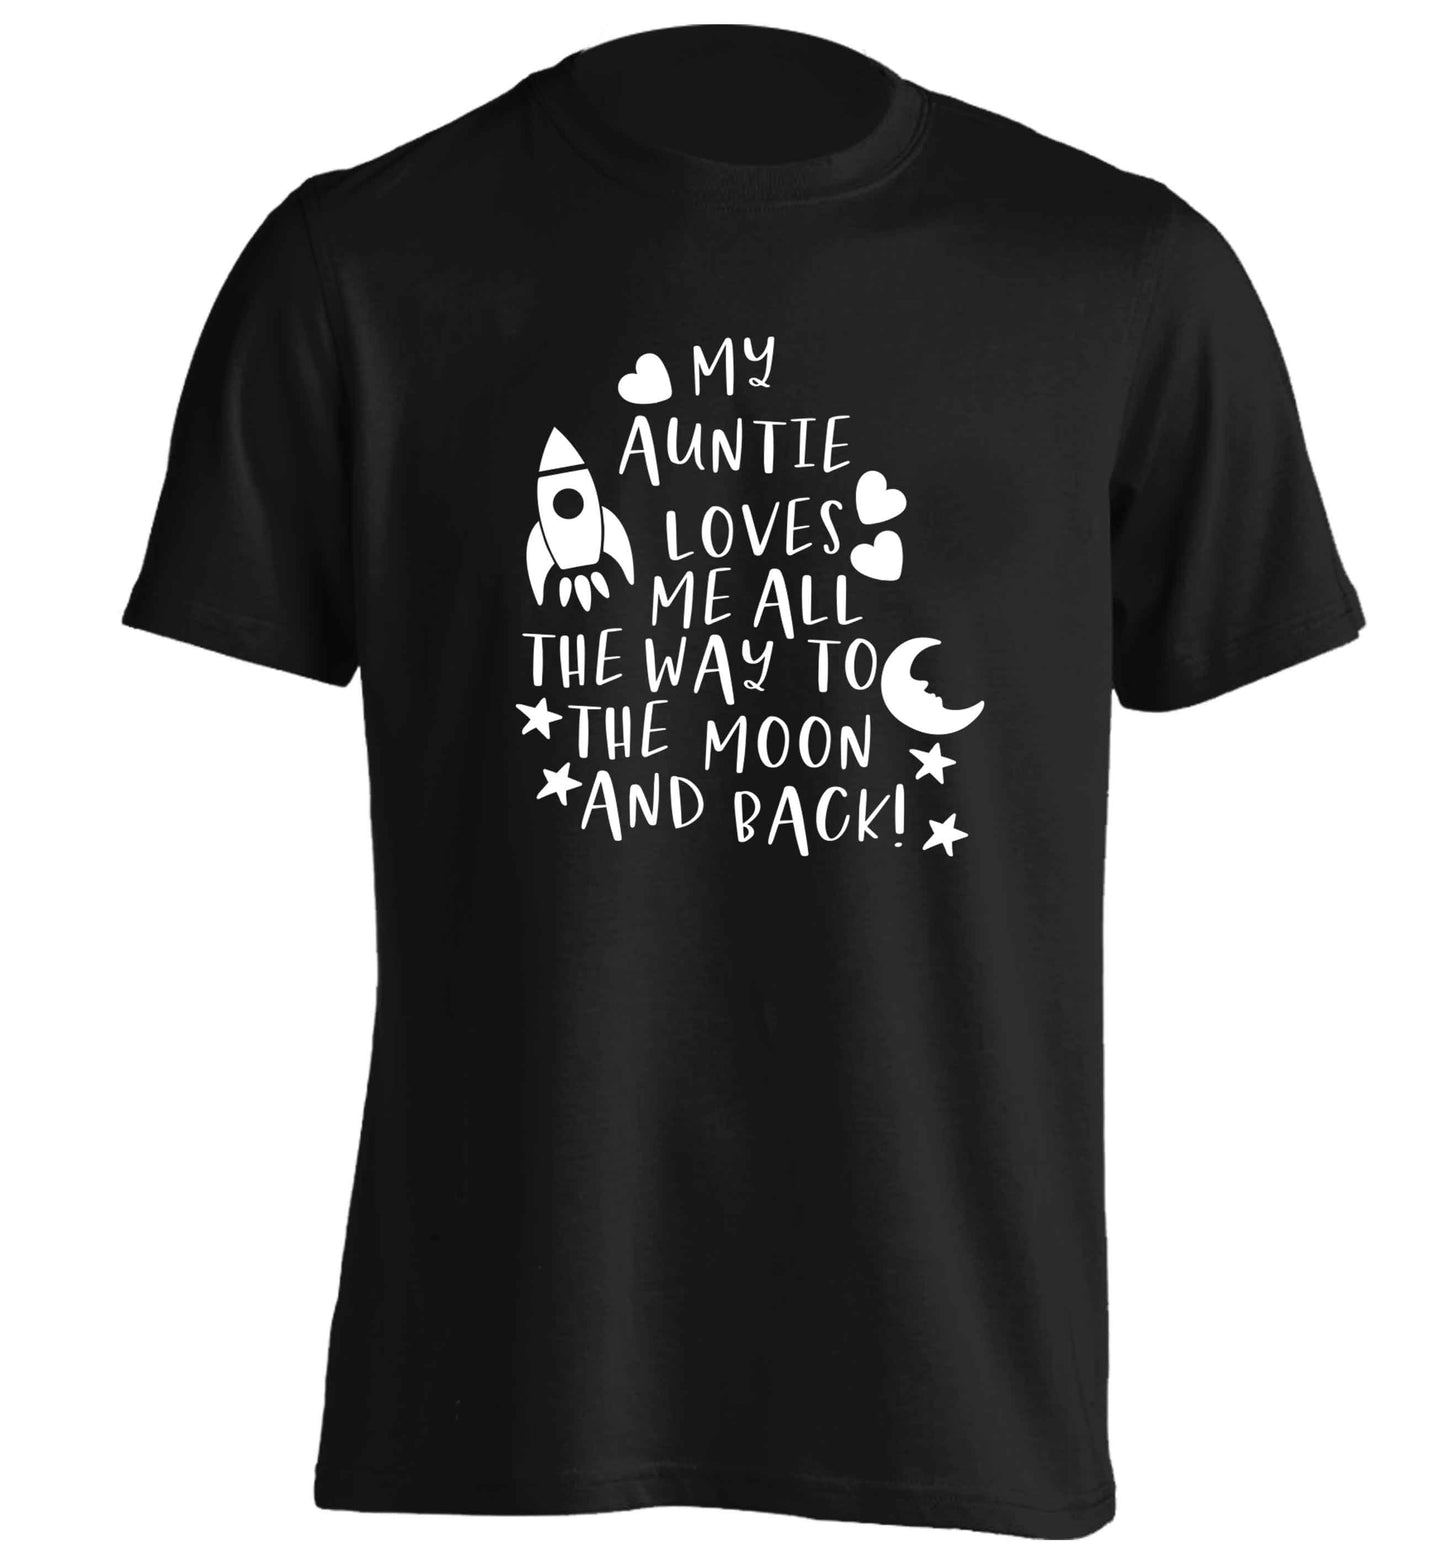 My auntie loves me all the way to the moon and back adults unisex black Tshirt 2XL